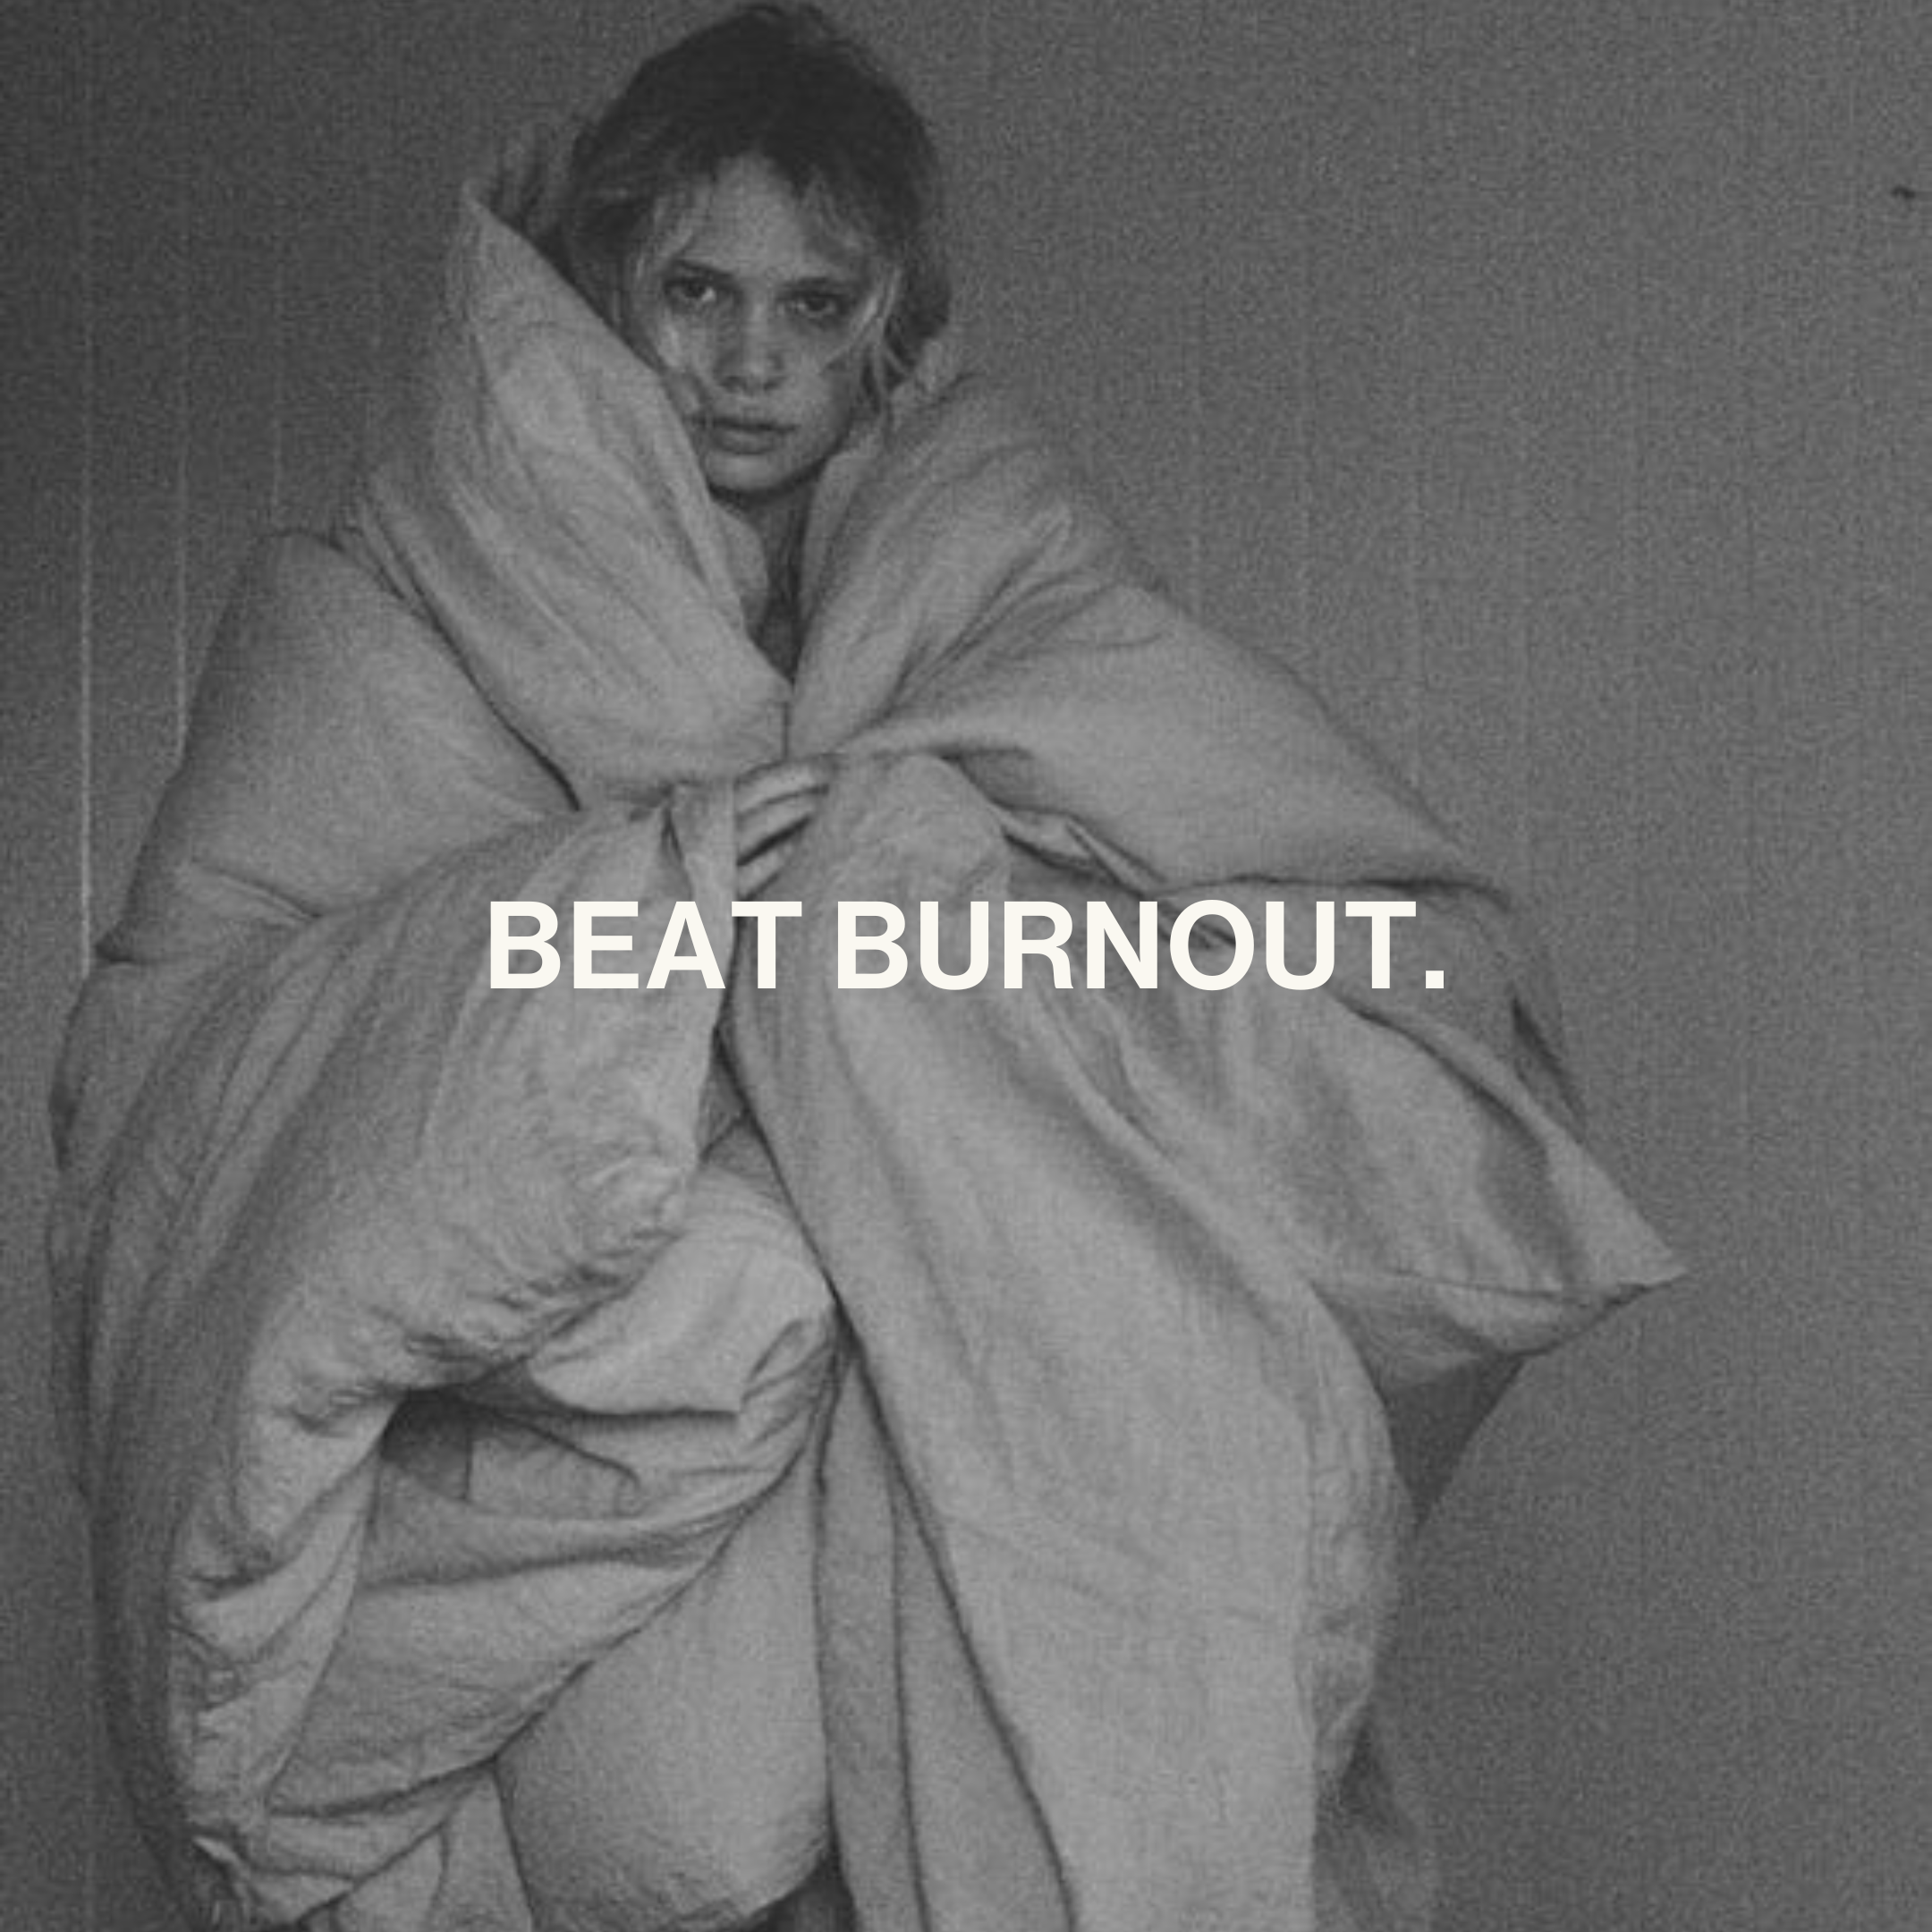 BEAT BURNOUT THIS SILLY SEASON